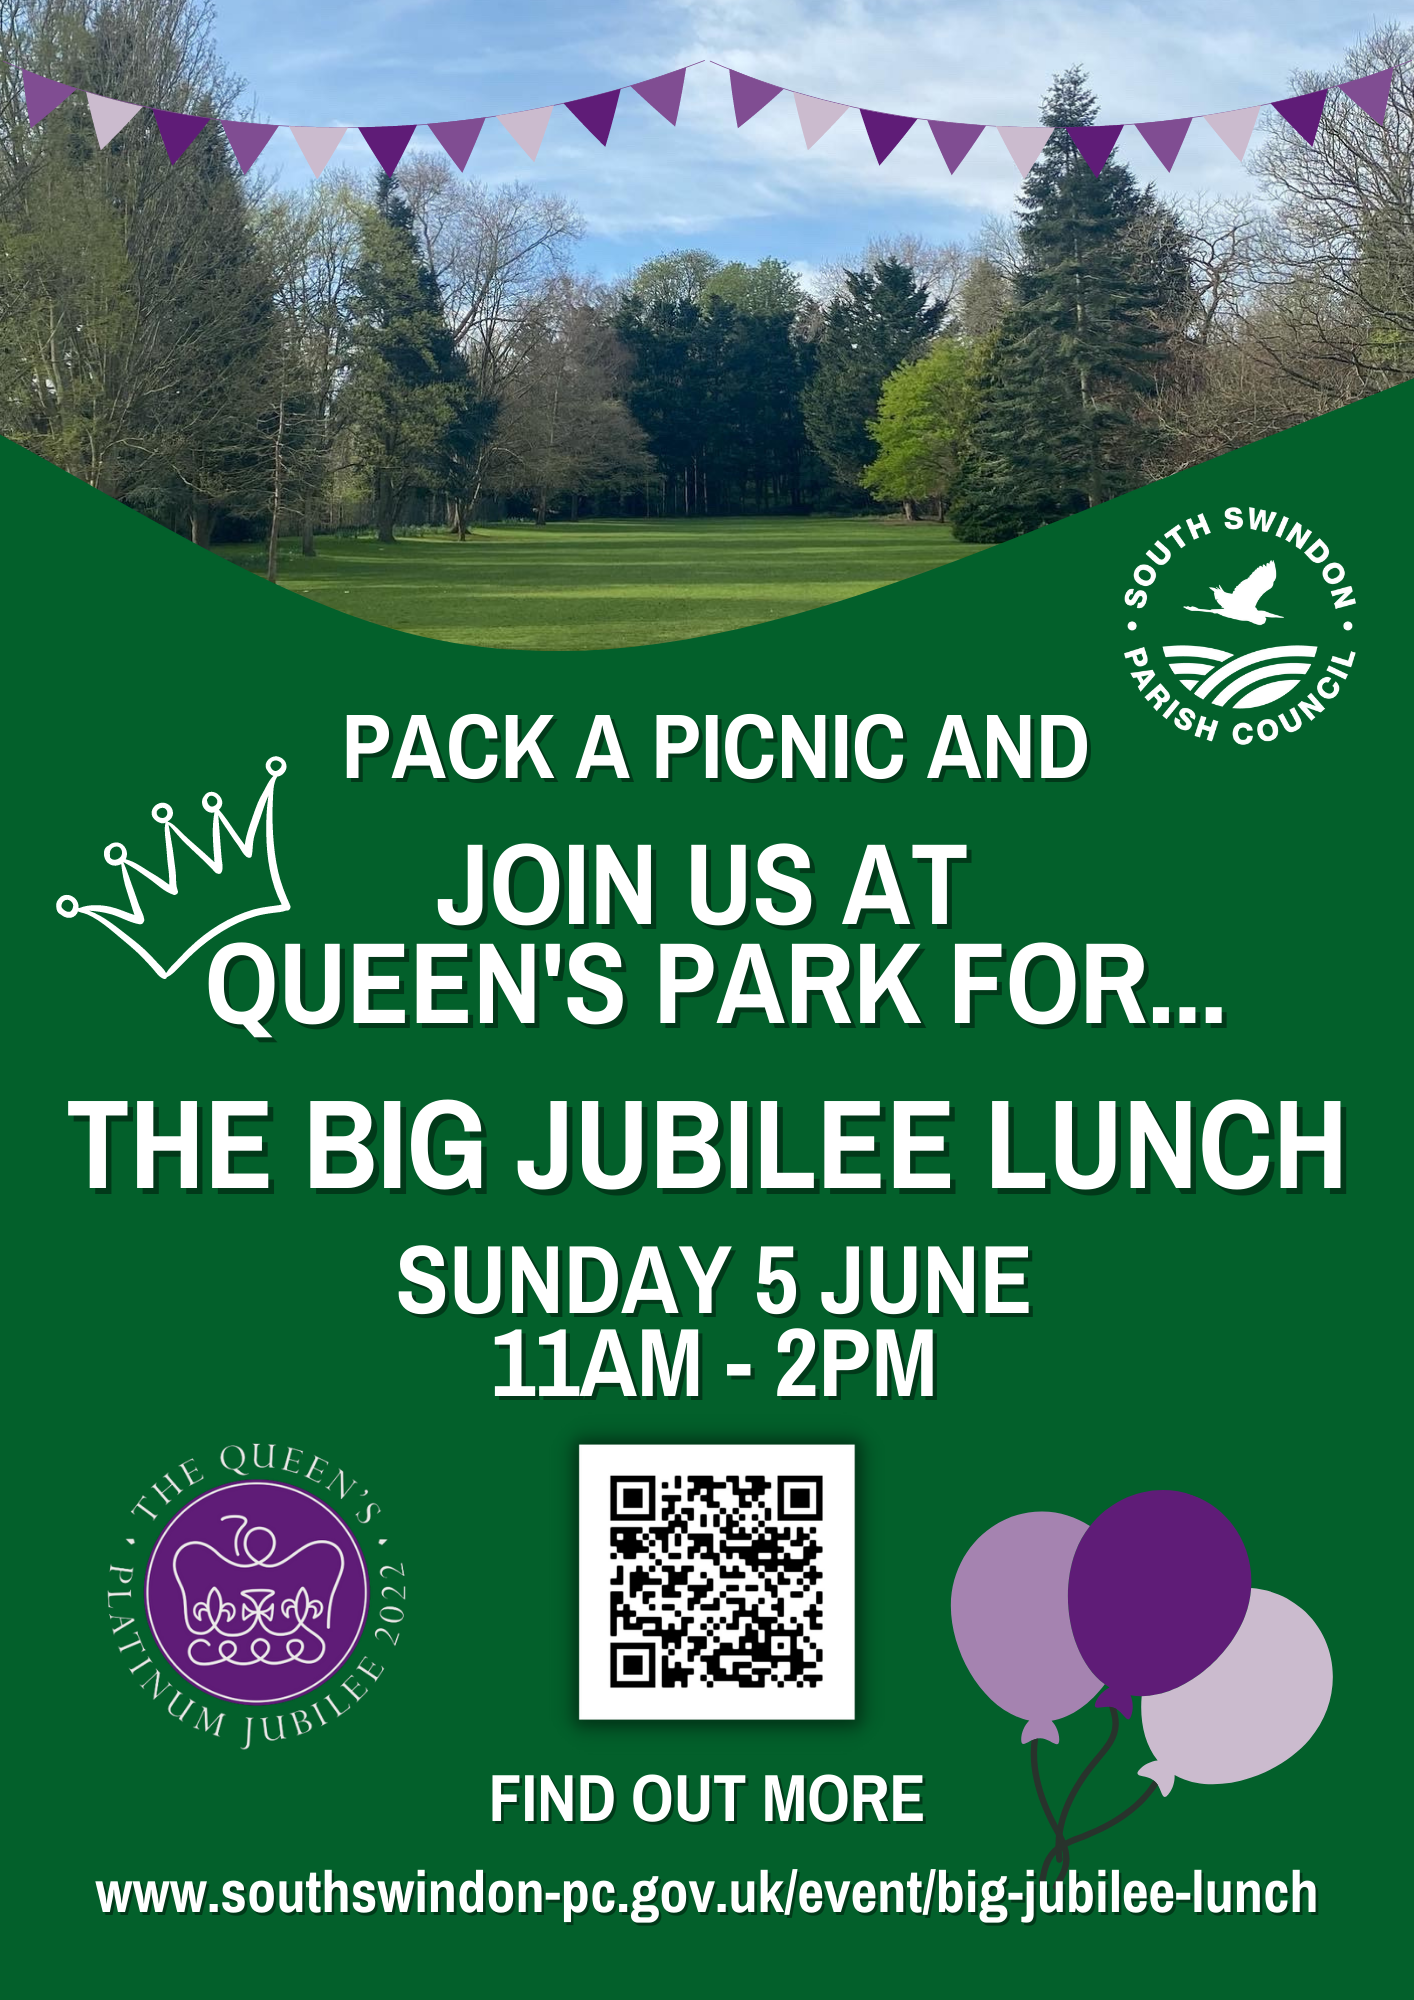 BIG JUBILEE LUNCH TO TAKE PLACE IN QUEEN’S PARK